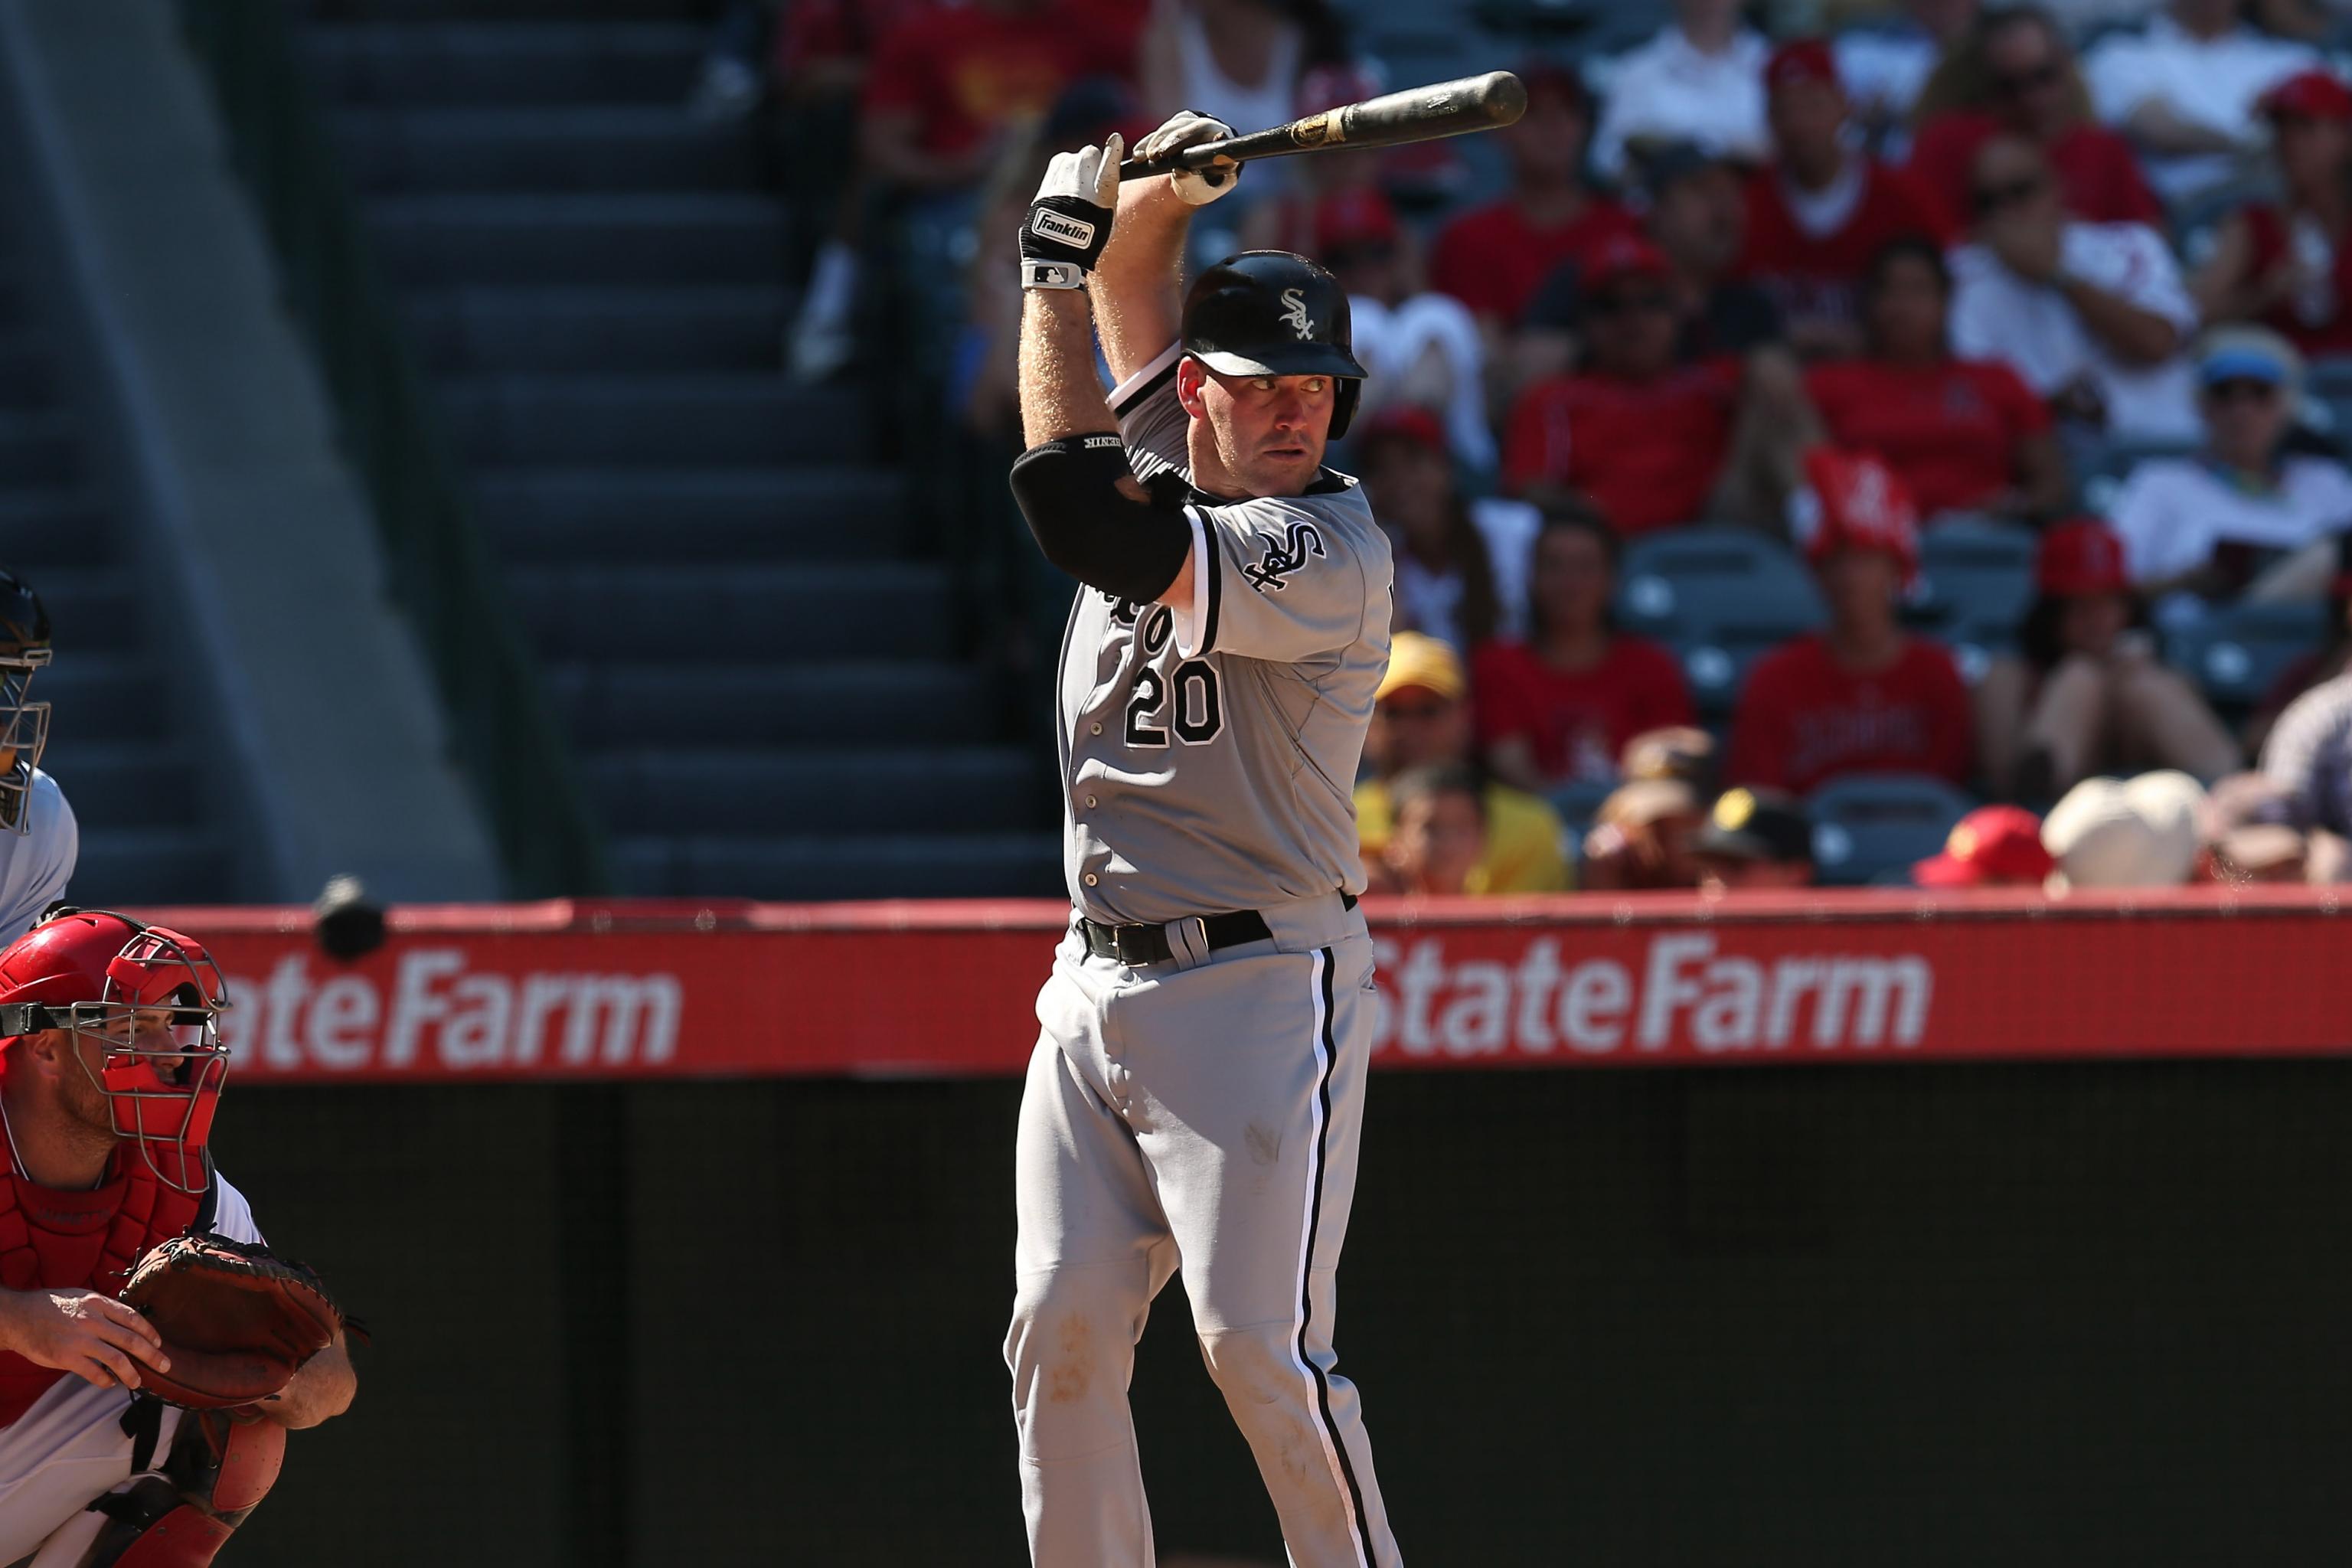 YANKEES: Kevin Youkilis deal finalized